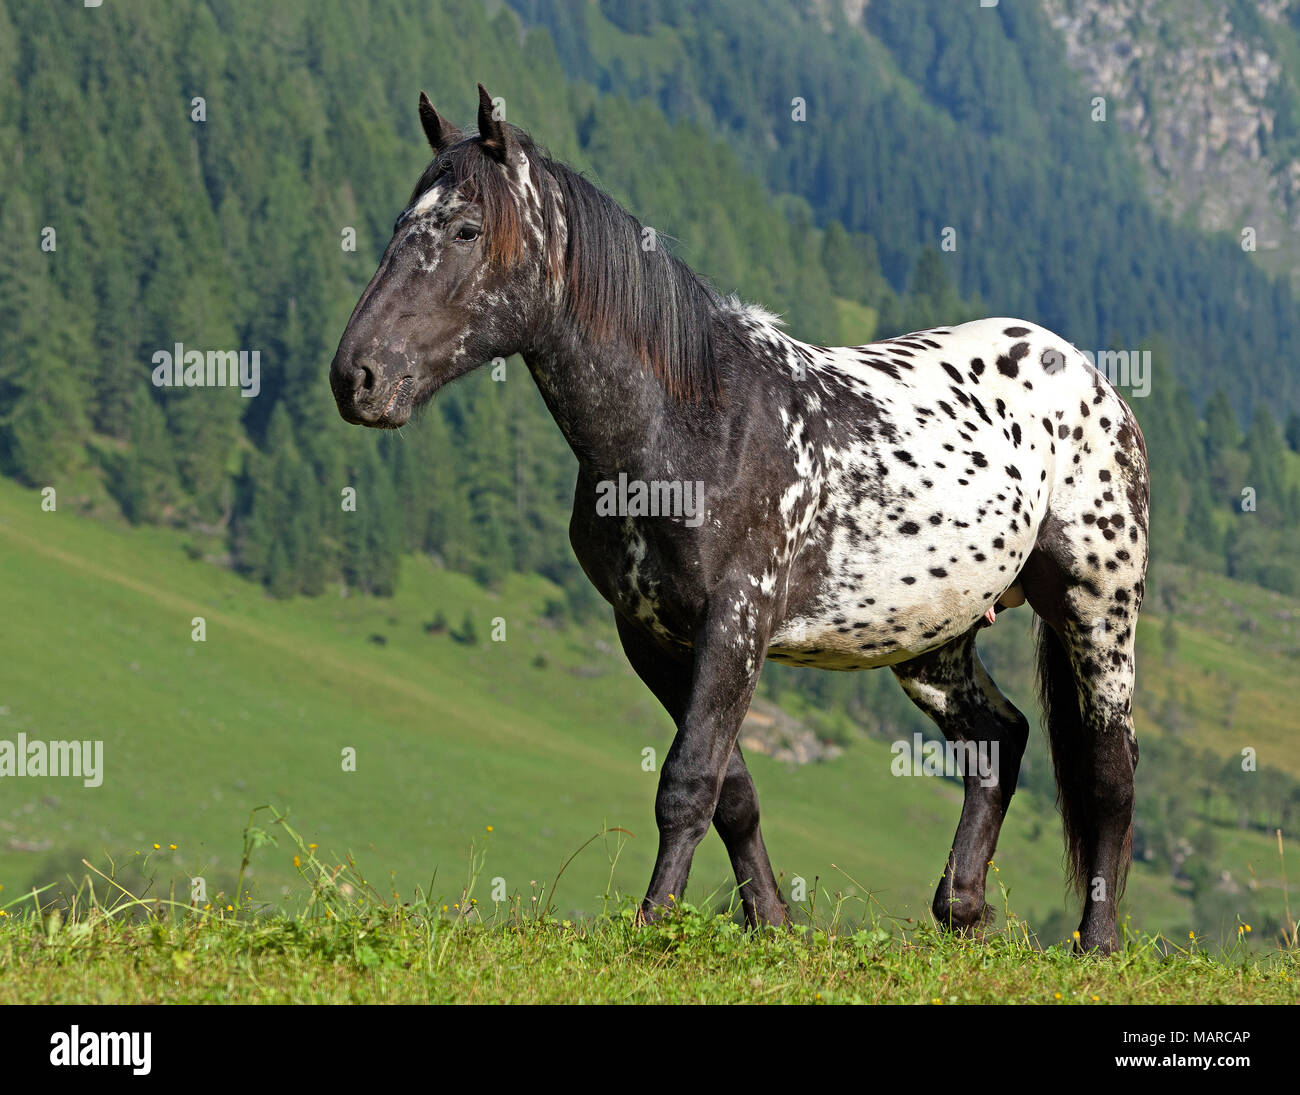 Noriker Horse. Leopard-spotted horse walking on a mountain pasture. Austria Stock Photo